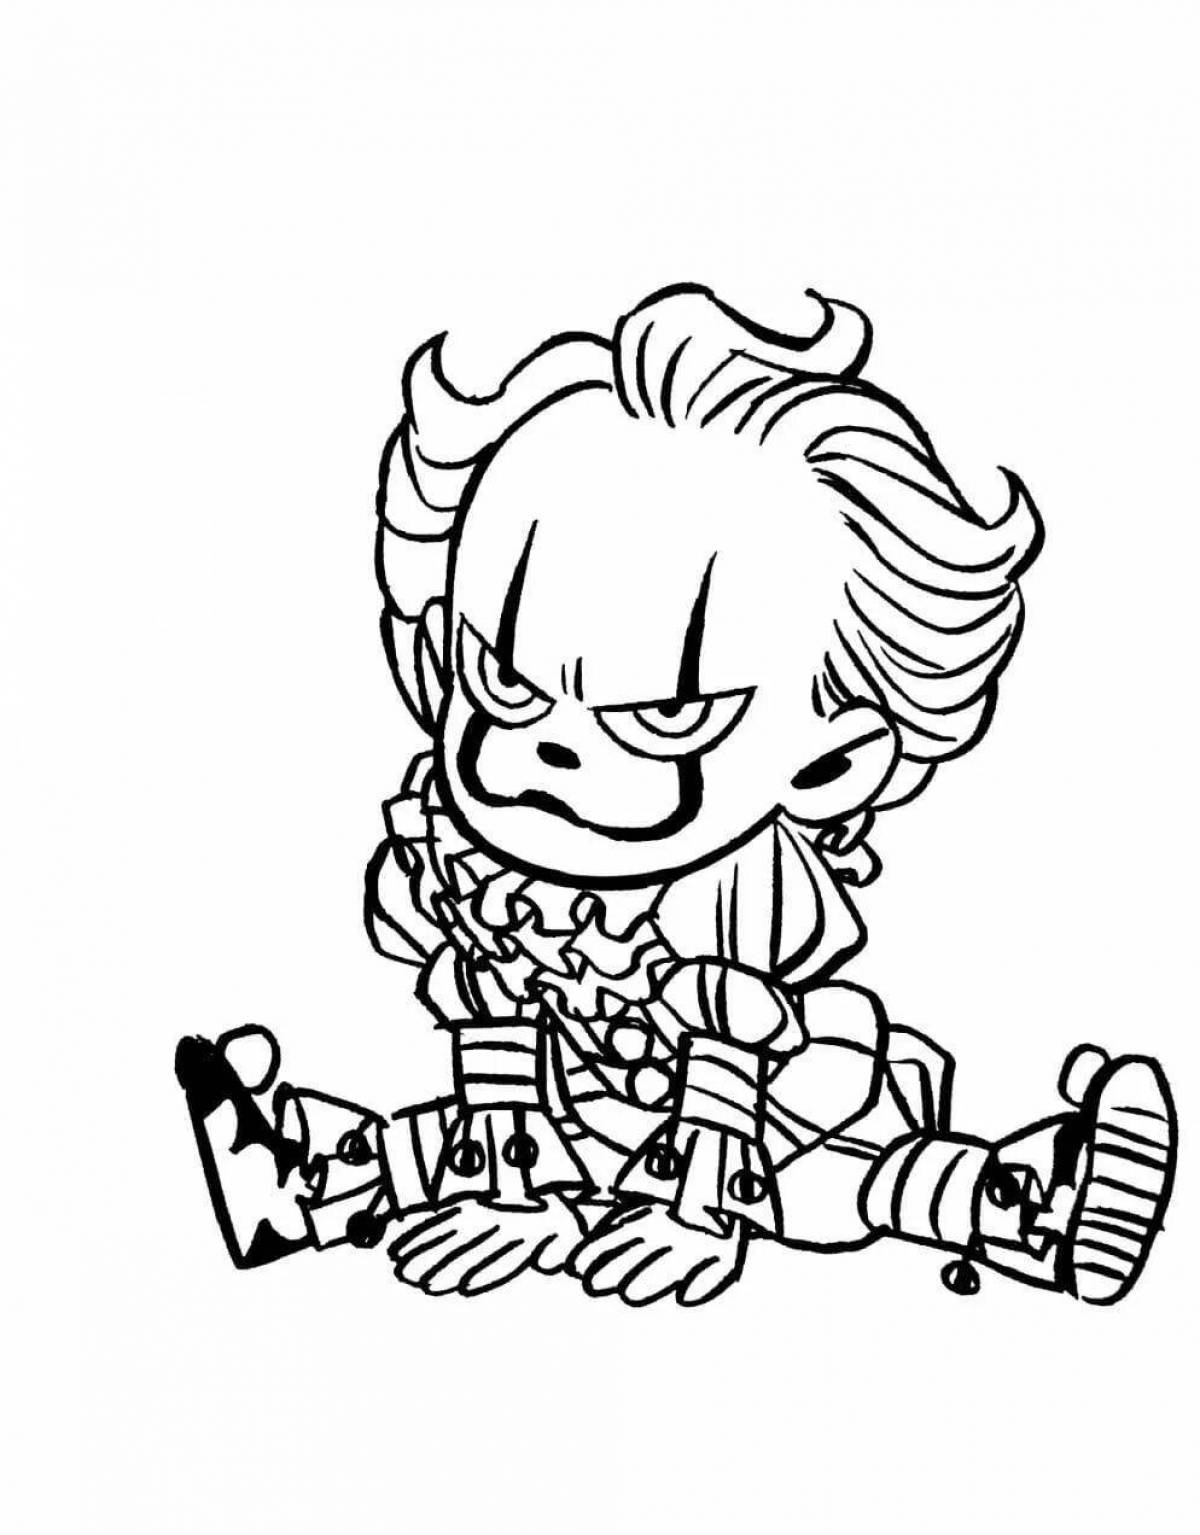 Coloring page freaky clown penivals